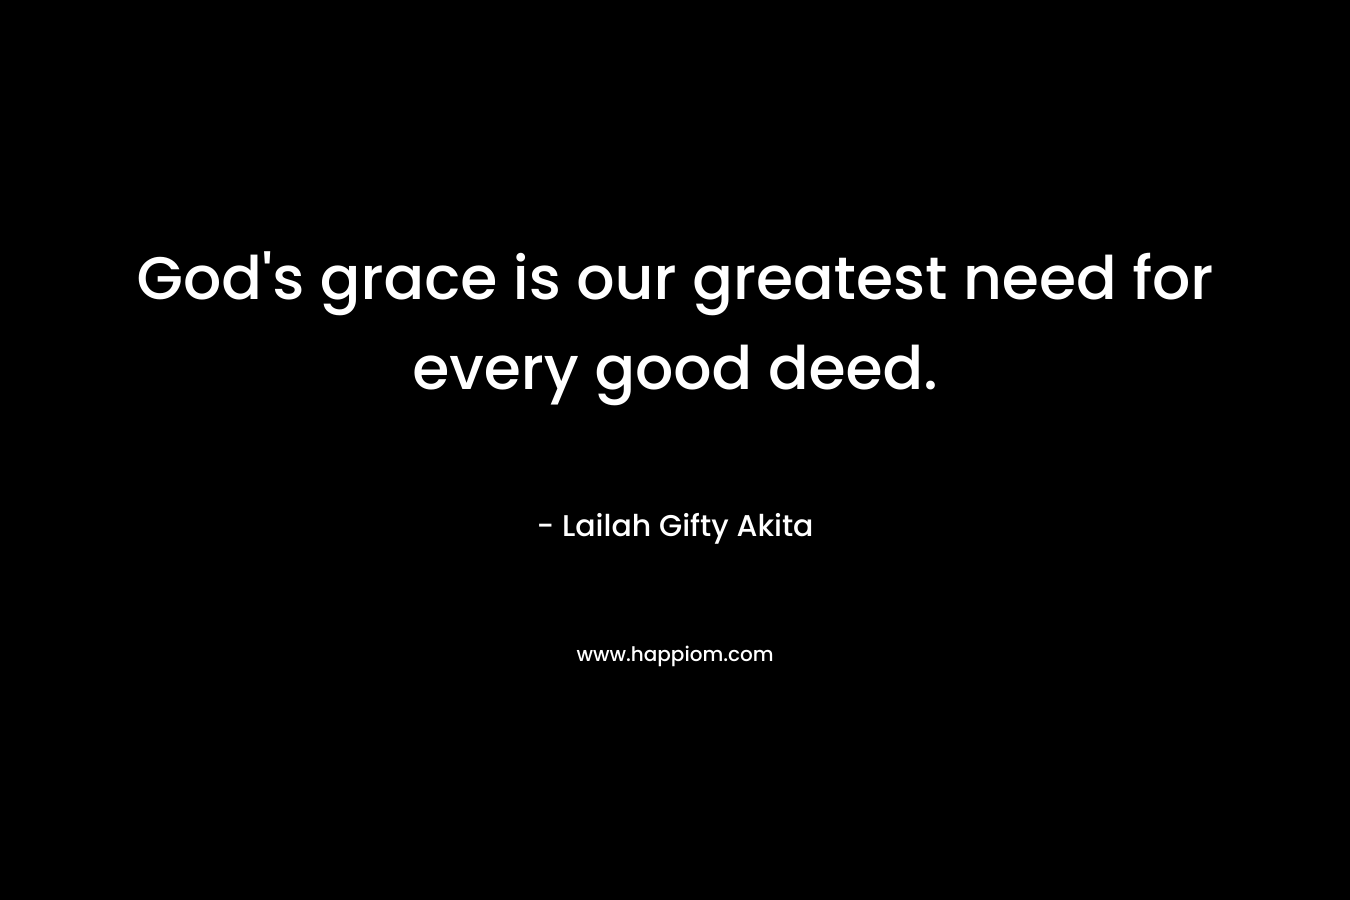 God's grace is our greatest need for every good deed.